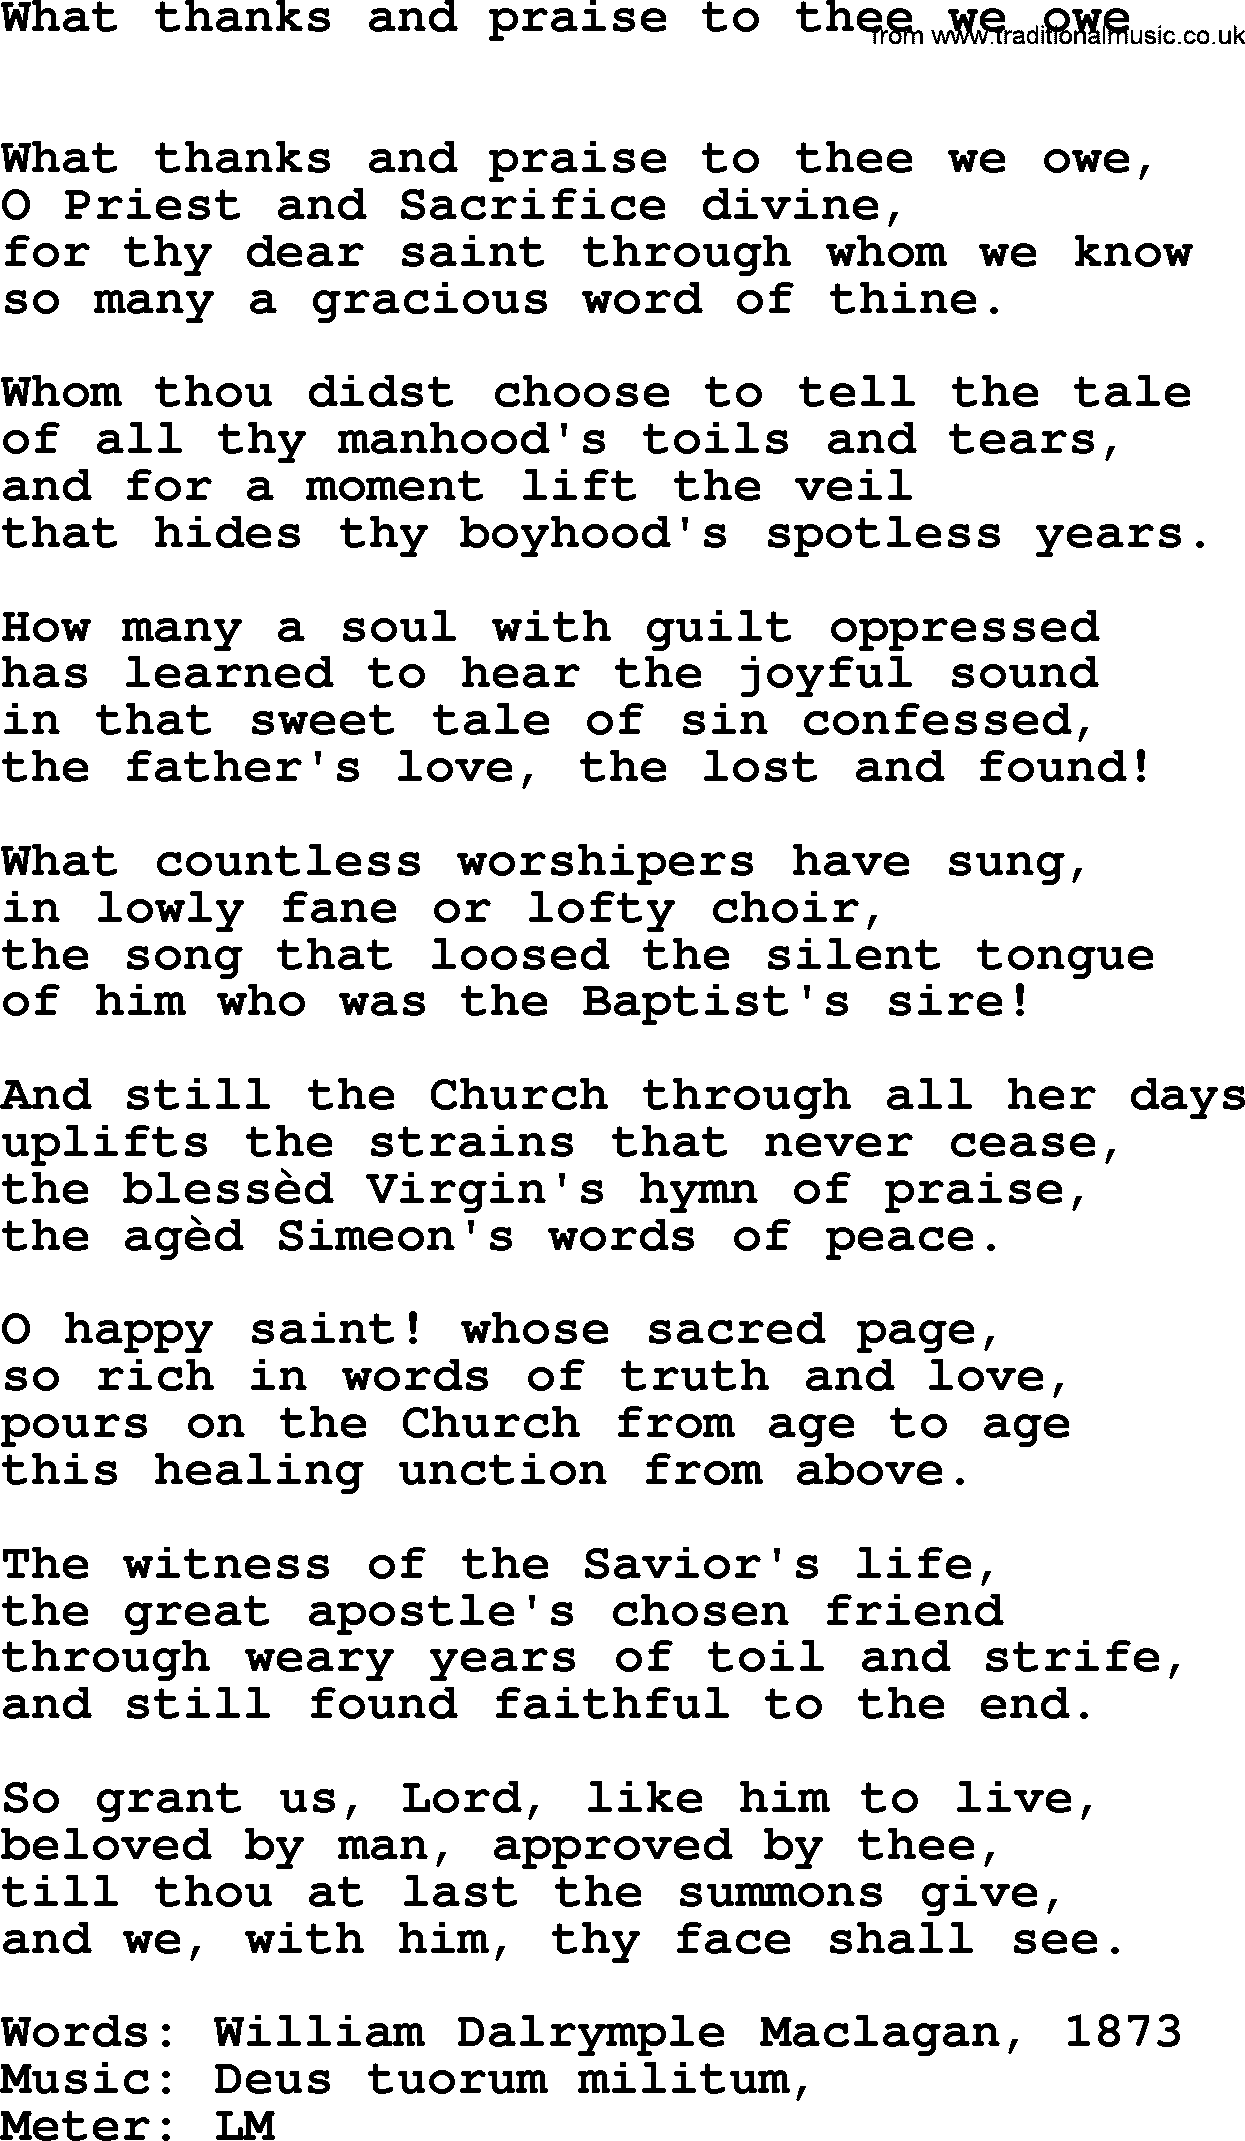 Book of Common Praise Hymn: What Thanks And Praise To Thee We Owe.txt lyrics with midi music